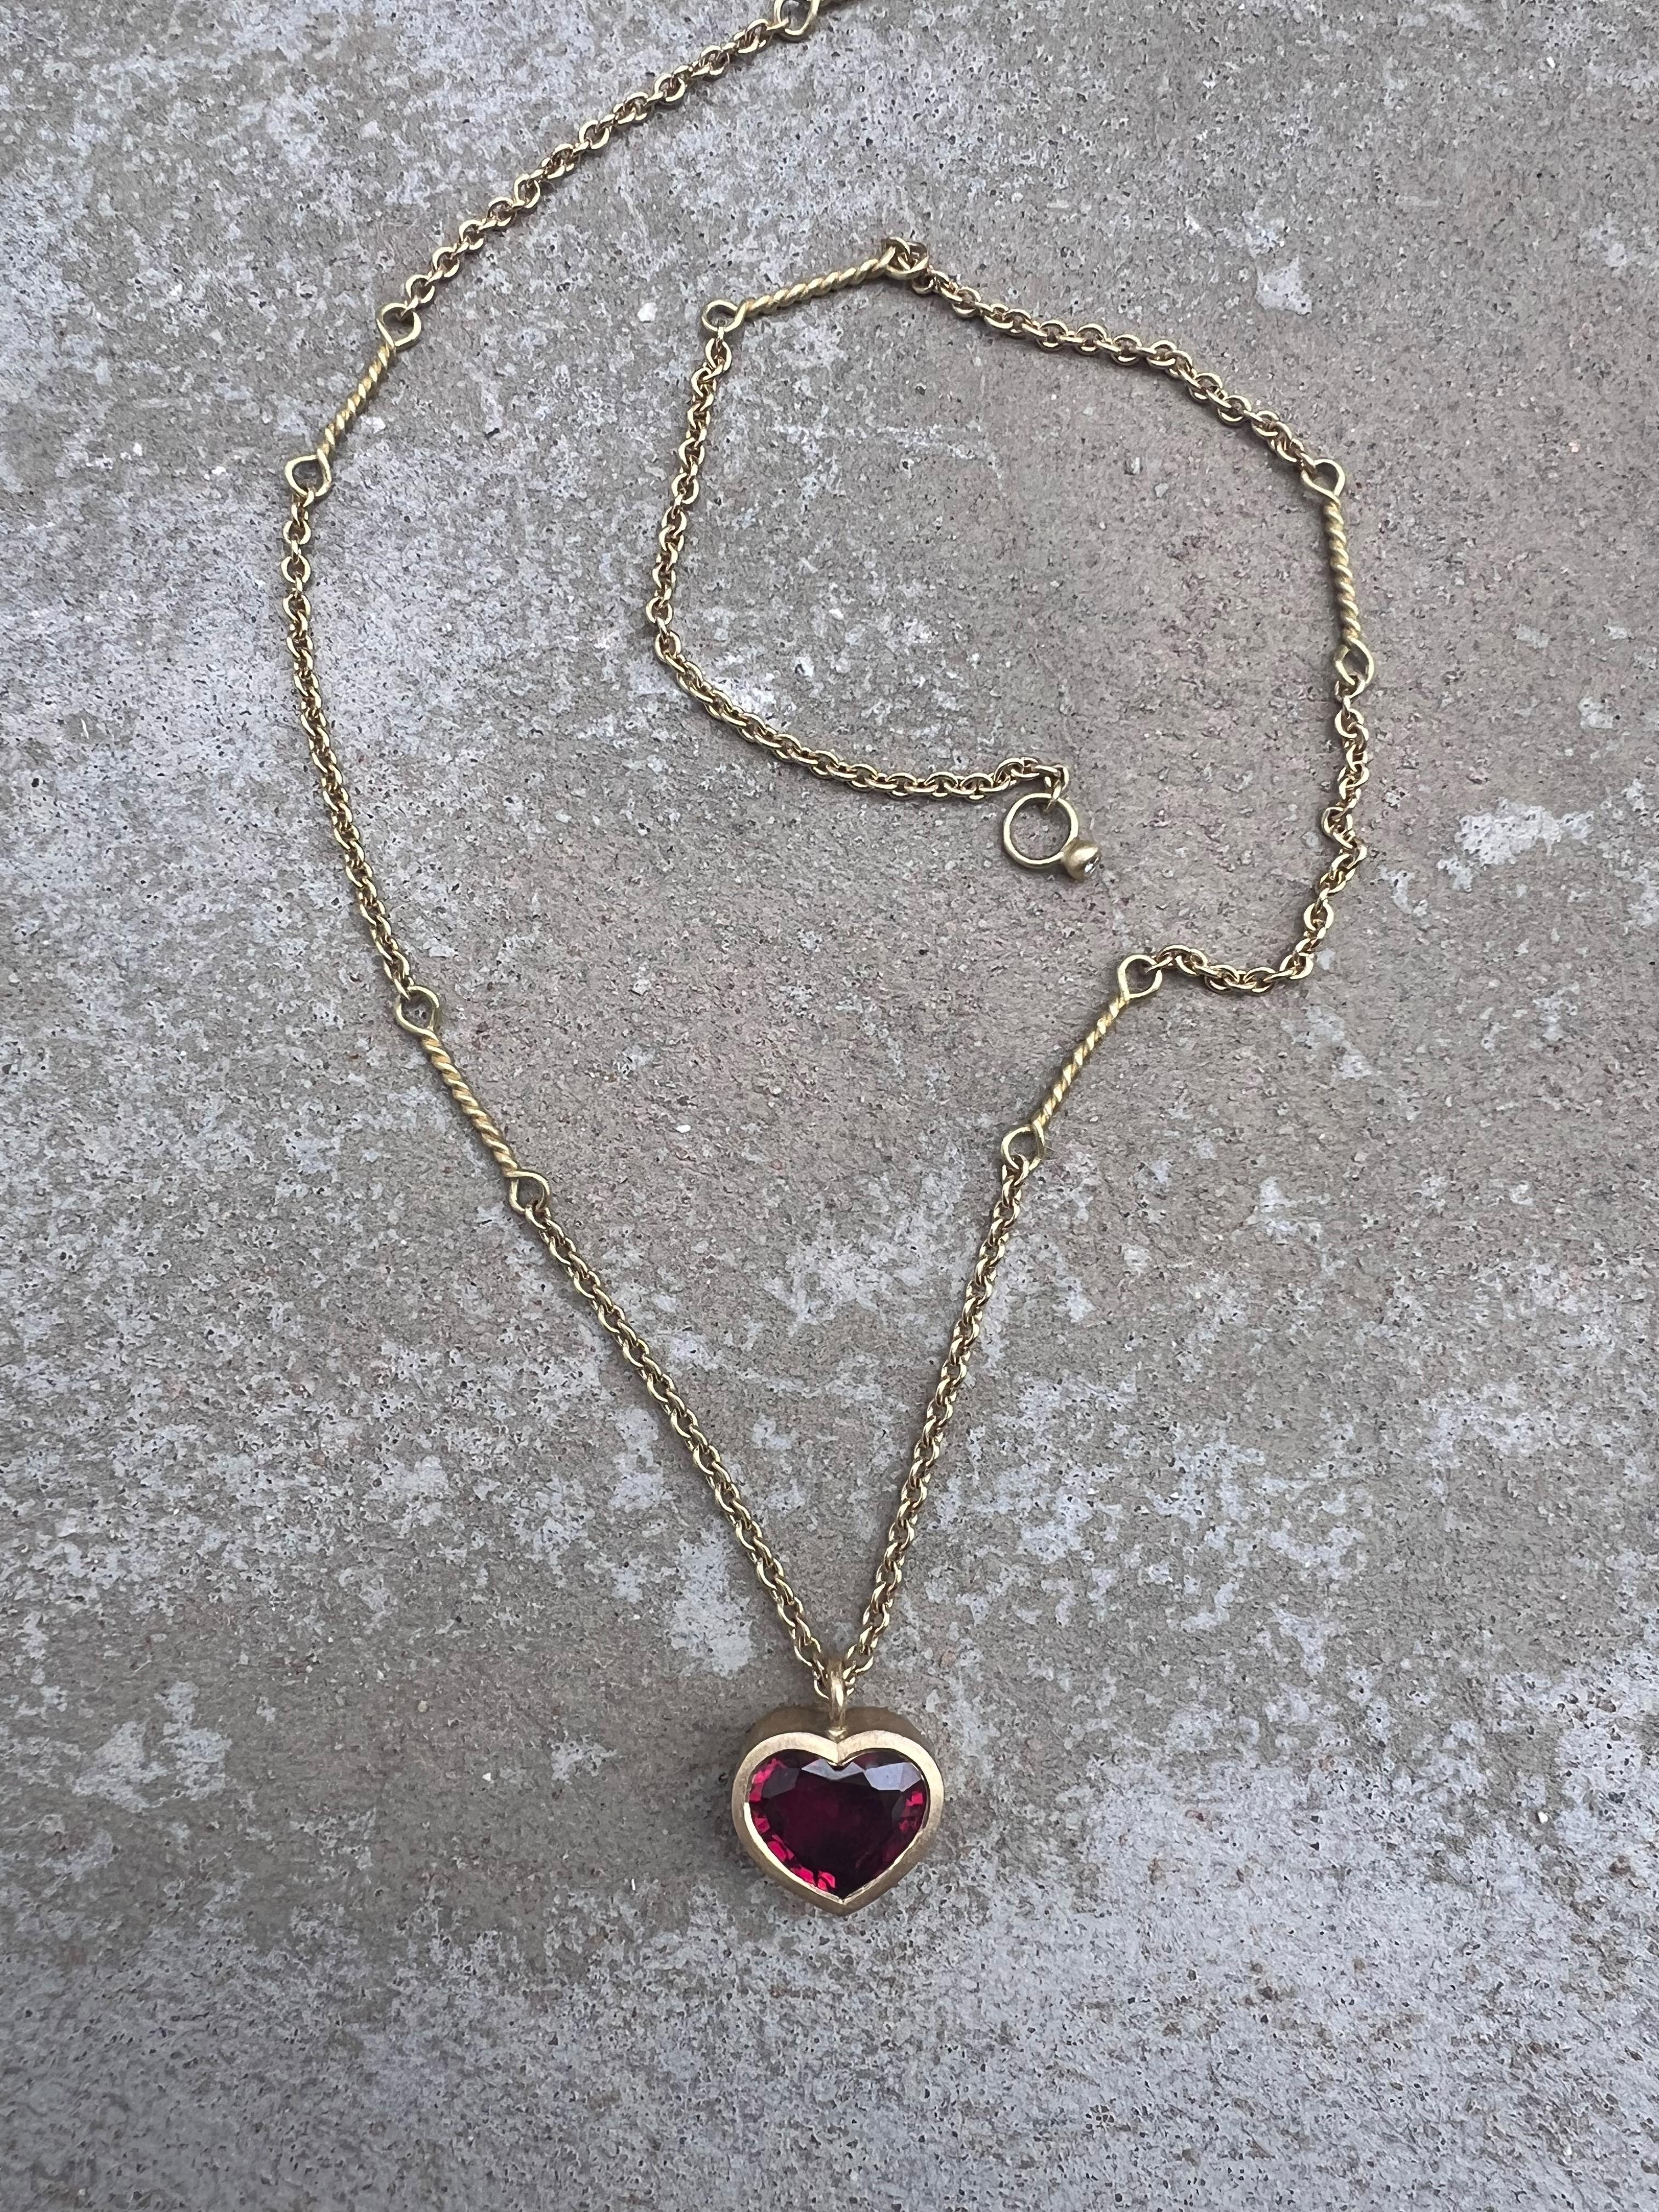 Heartfelt Elegance: The Ruby Twisted Chain Necklace

Indulge in the romance of timeless elegance with our exquisite Heart-shaped Ruby Twisted Chain Necklace, a stunning emblem of love and sophistication.

Handcrafted with meticulous attention to